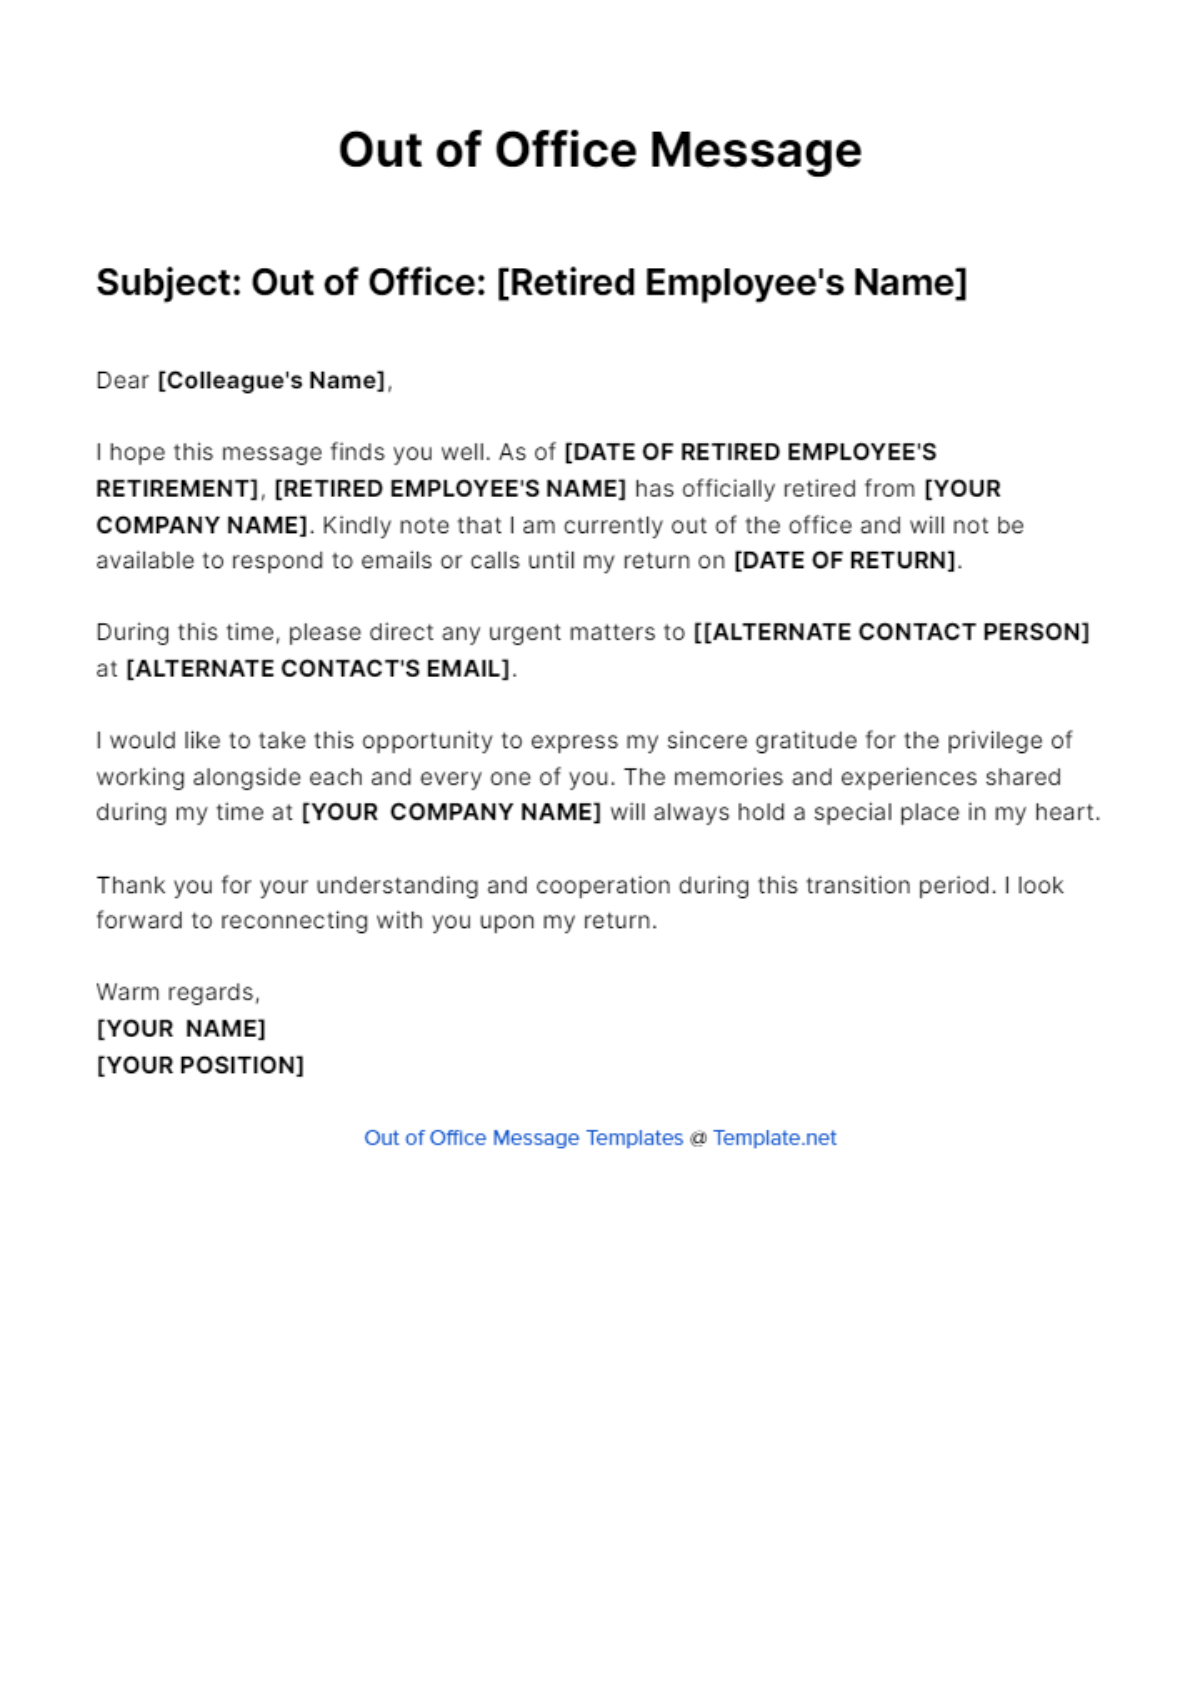 Out Of Office Message For Retired Employee Template